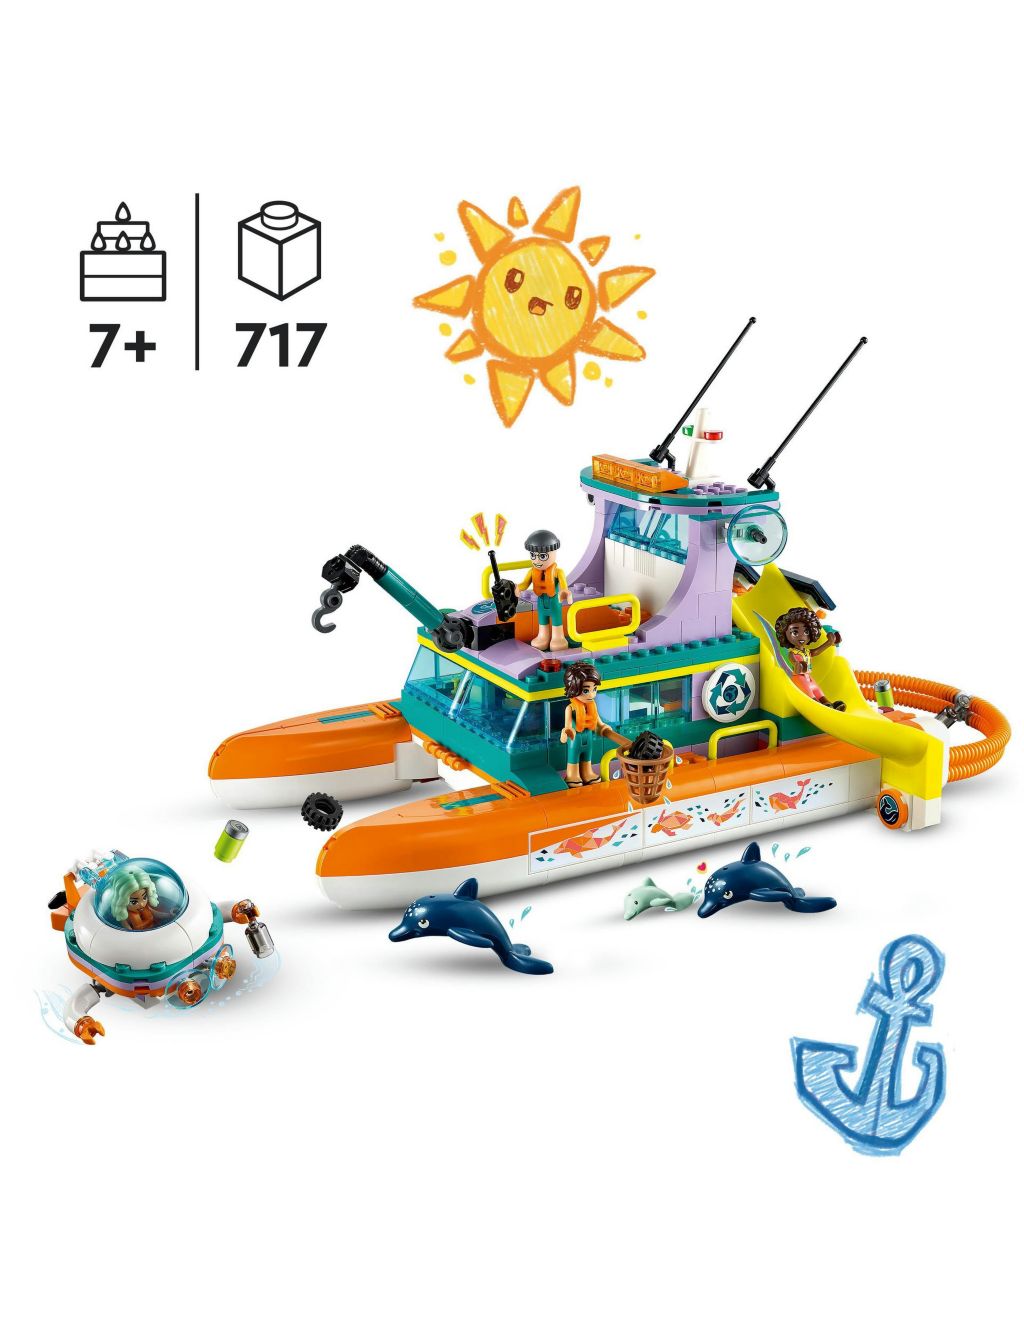 LEGO Friends Sea Rescue Boat Toy Playset (7+ Yrs) image 2